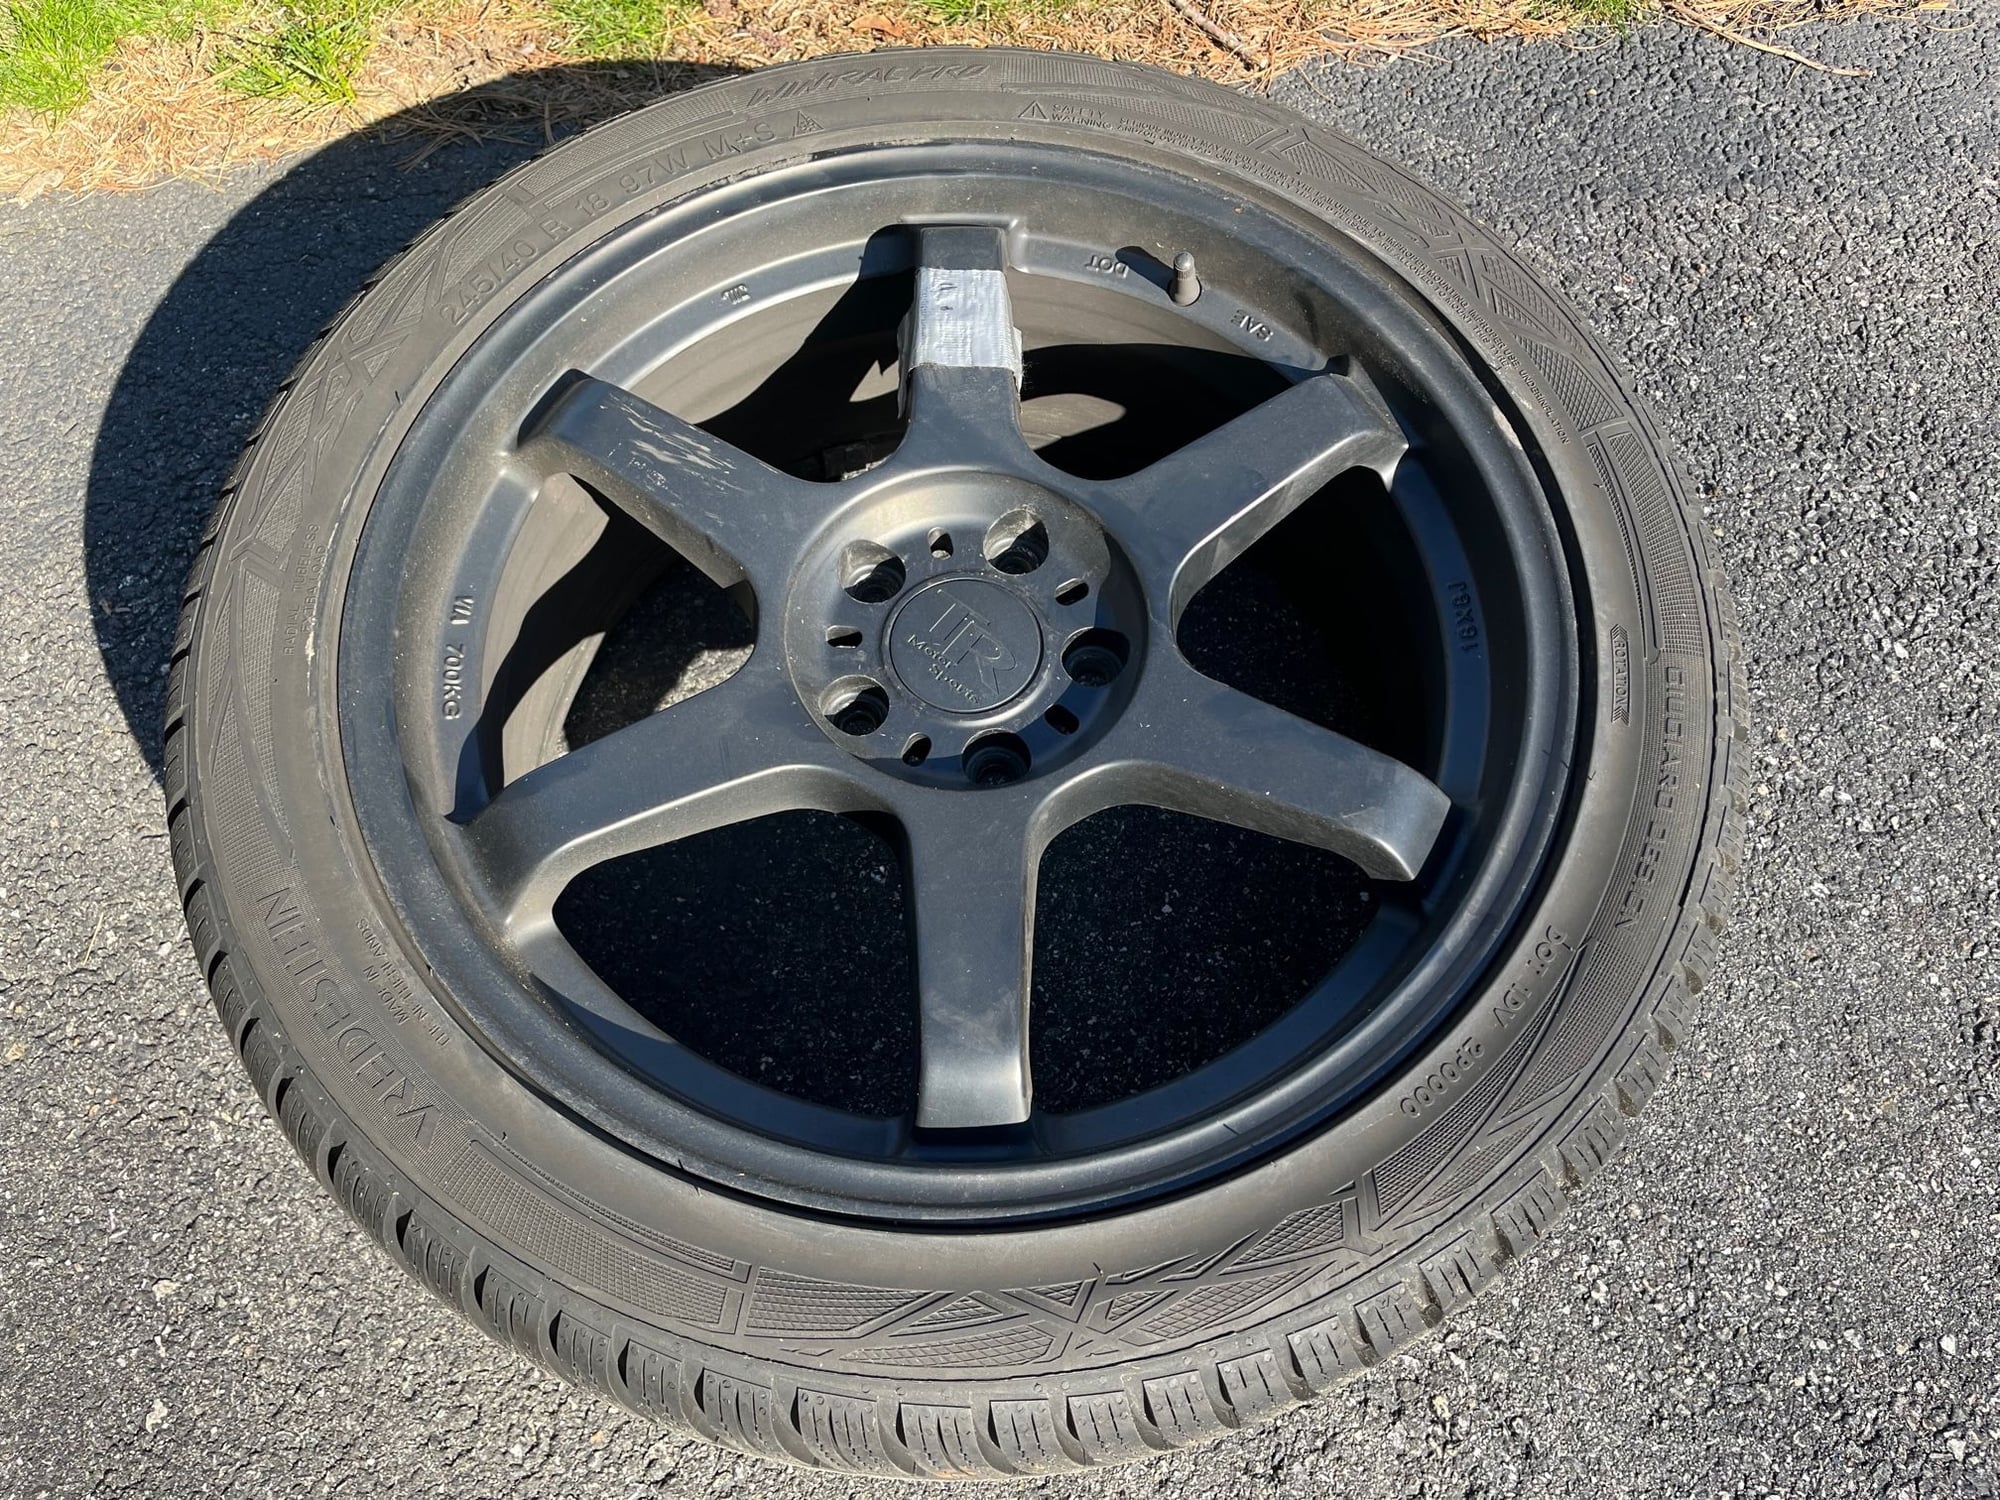 Wheels and Tires/Axles - $800 Full Winter set 18x8 TRMotorsport C4 Black w/ 245/40R18 Vredestein WintracPro XL - Used - Wilmington, MA 1887, United States